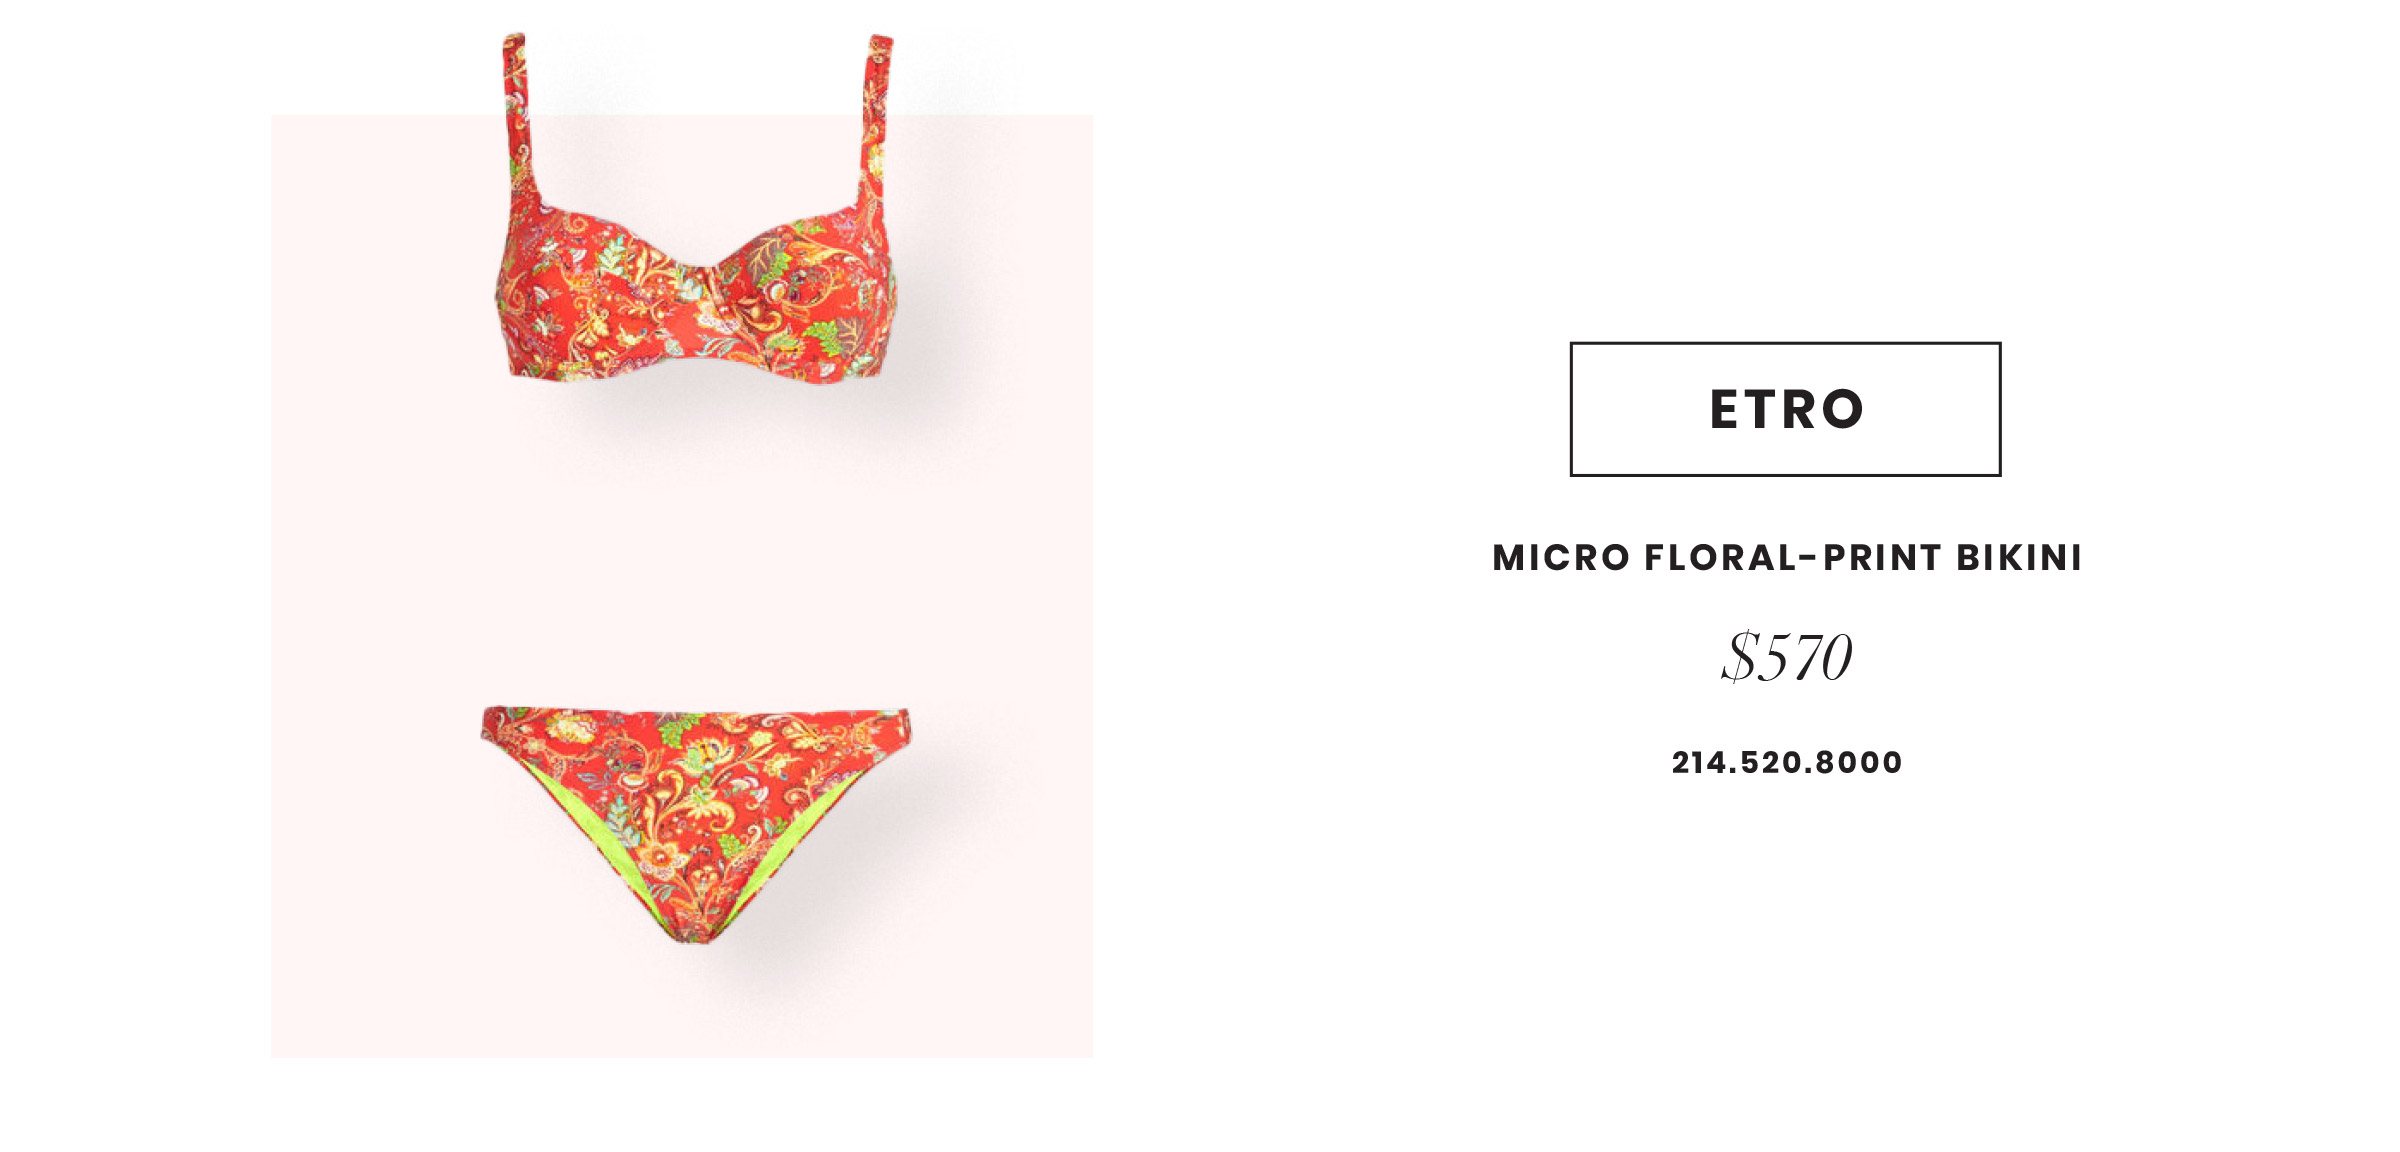 Etro red floral patterned bikini